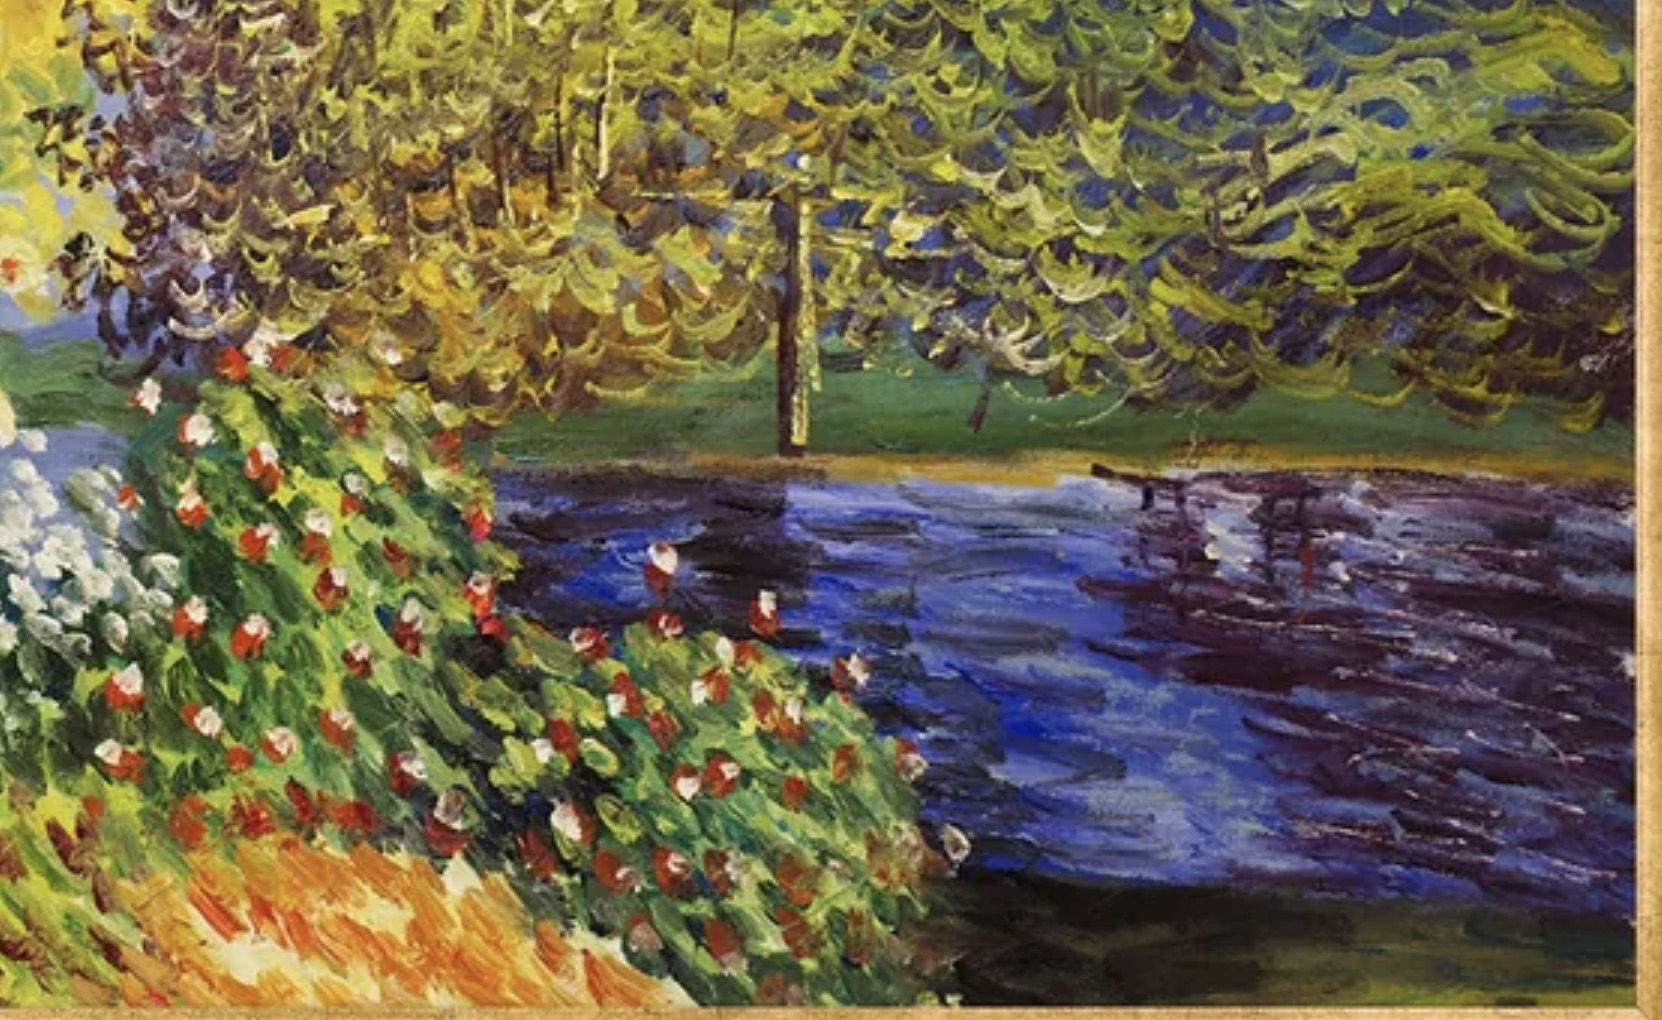 Claude Monet "Corner of the Garden at Montgeron" Oil Painting, After - Image 5 of 5